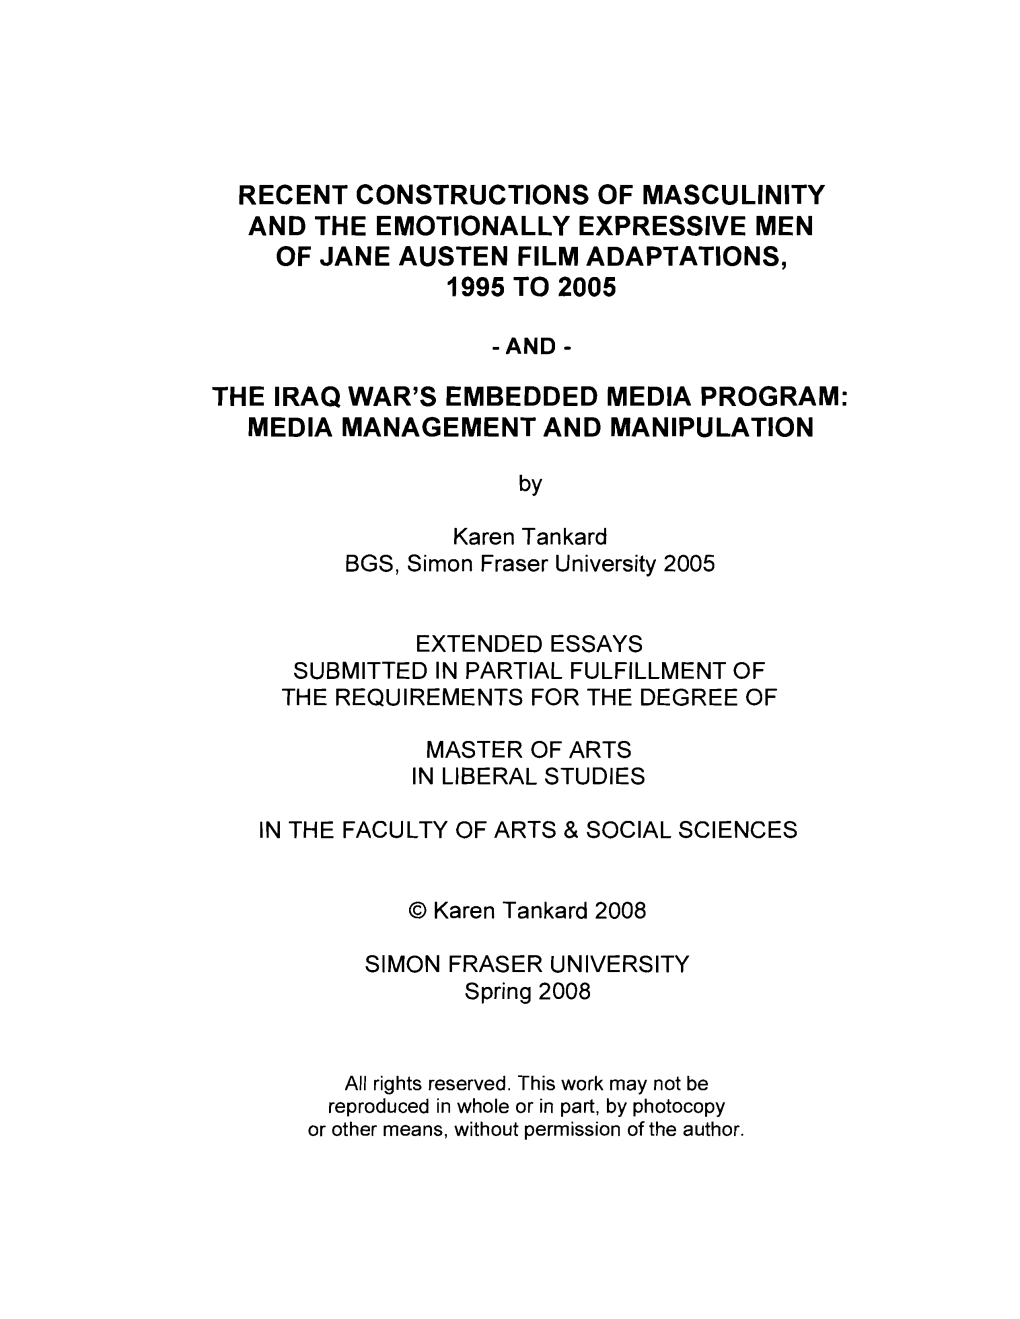 Recent Constructions of Masculinity and the Emotionally Expressive Men of Jane Austen Film Adaptations, 1995 to 2005 the Iraq Wa